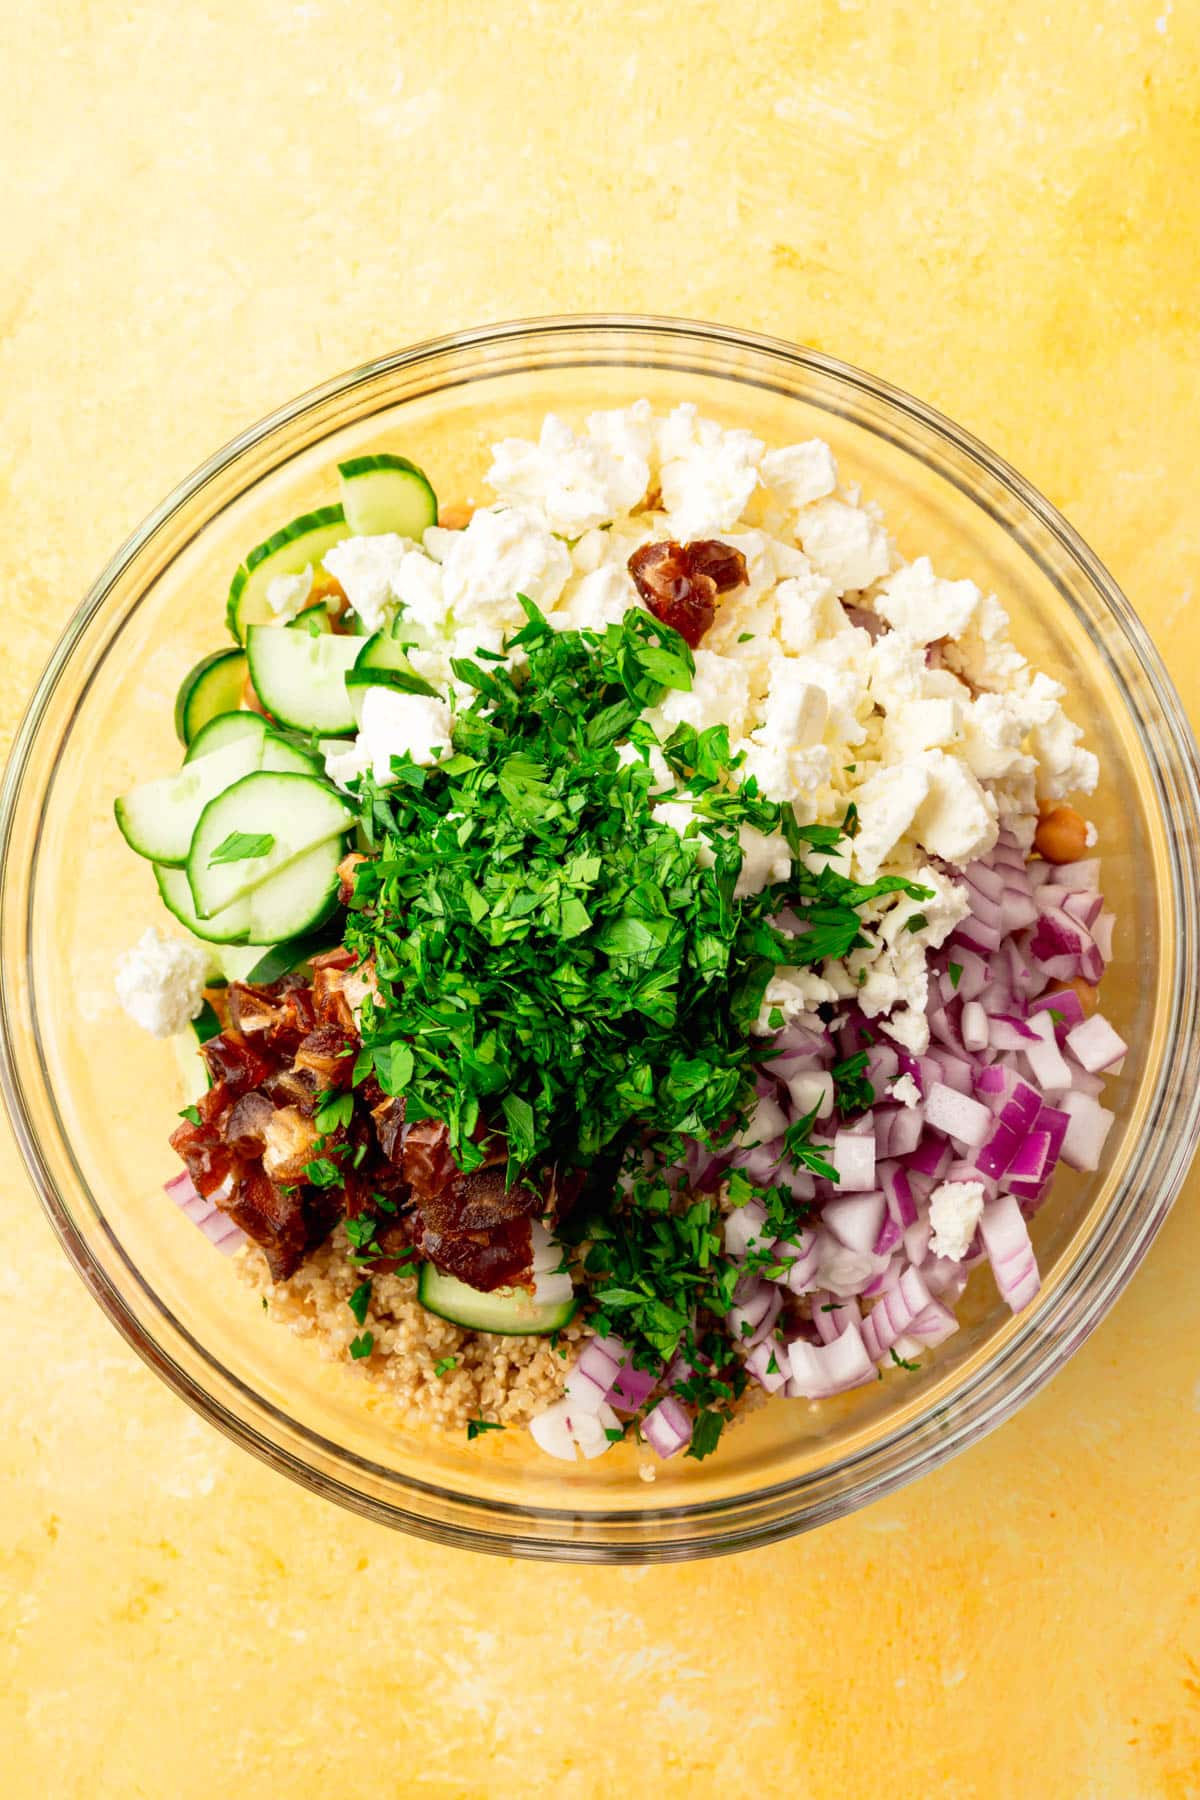 A glass mixing bowl with feta, sliced cucumber, diced red onion, diced dates, and quinoa in it before mixing together.